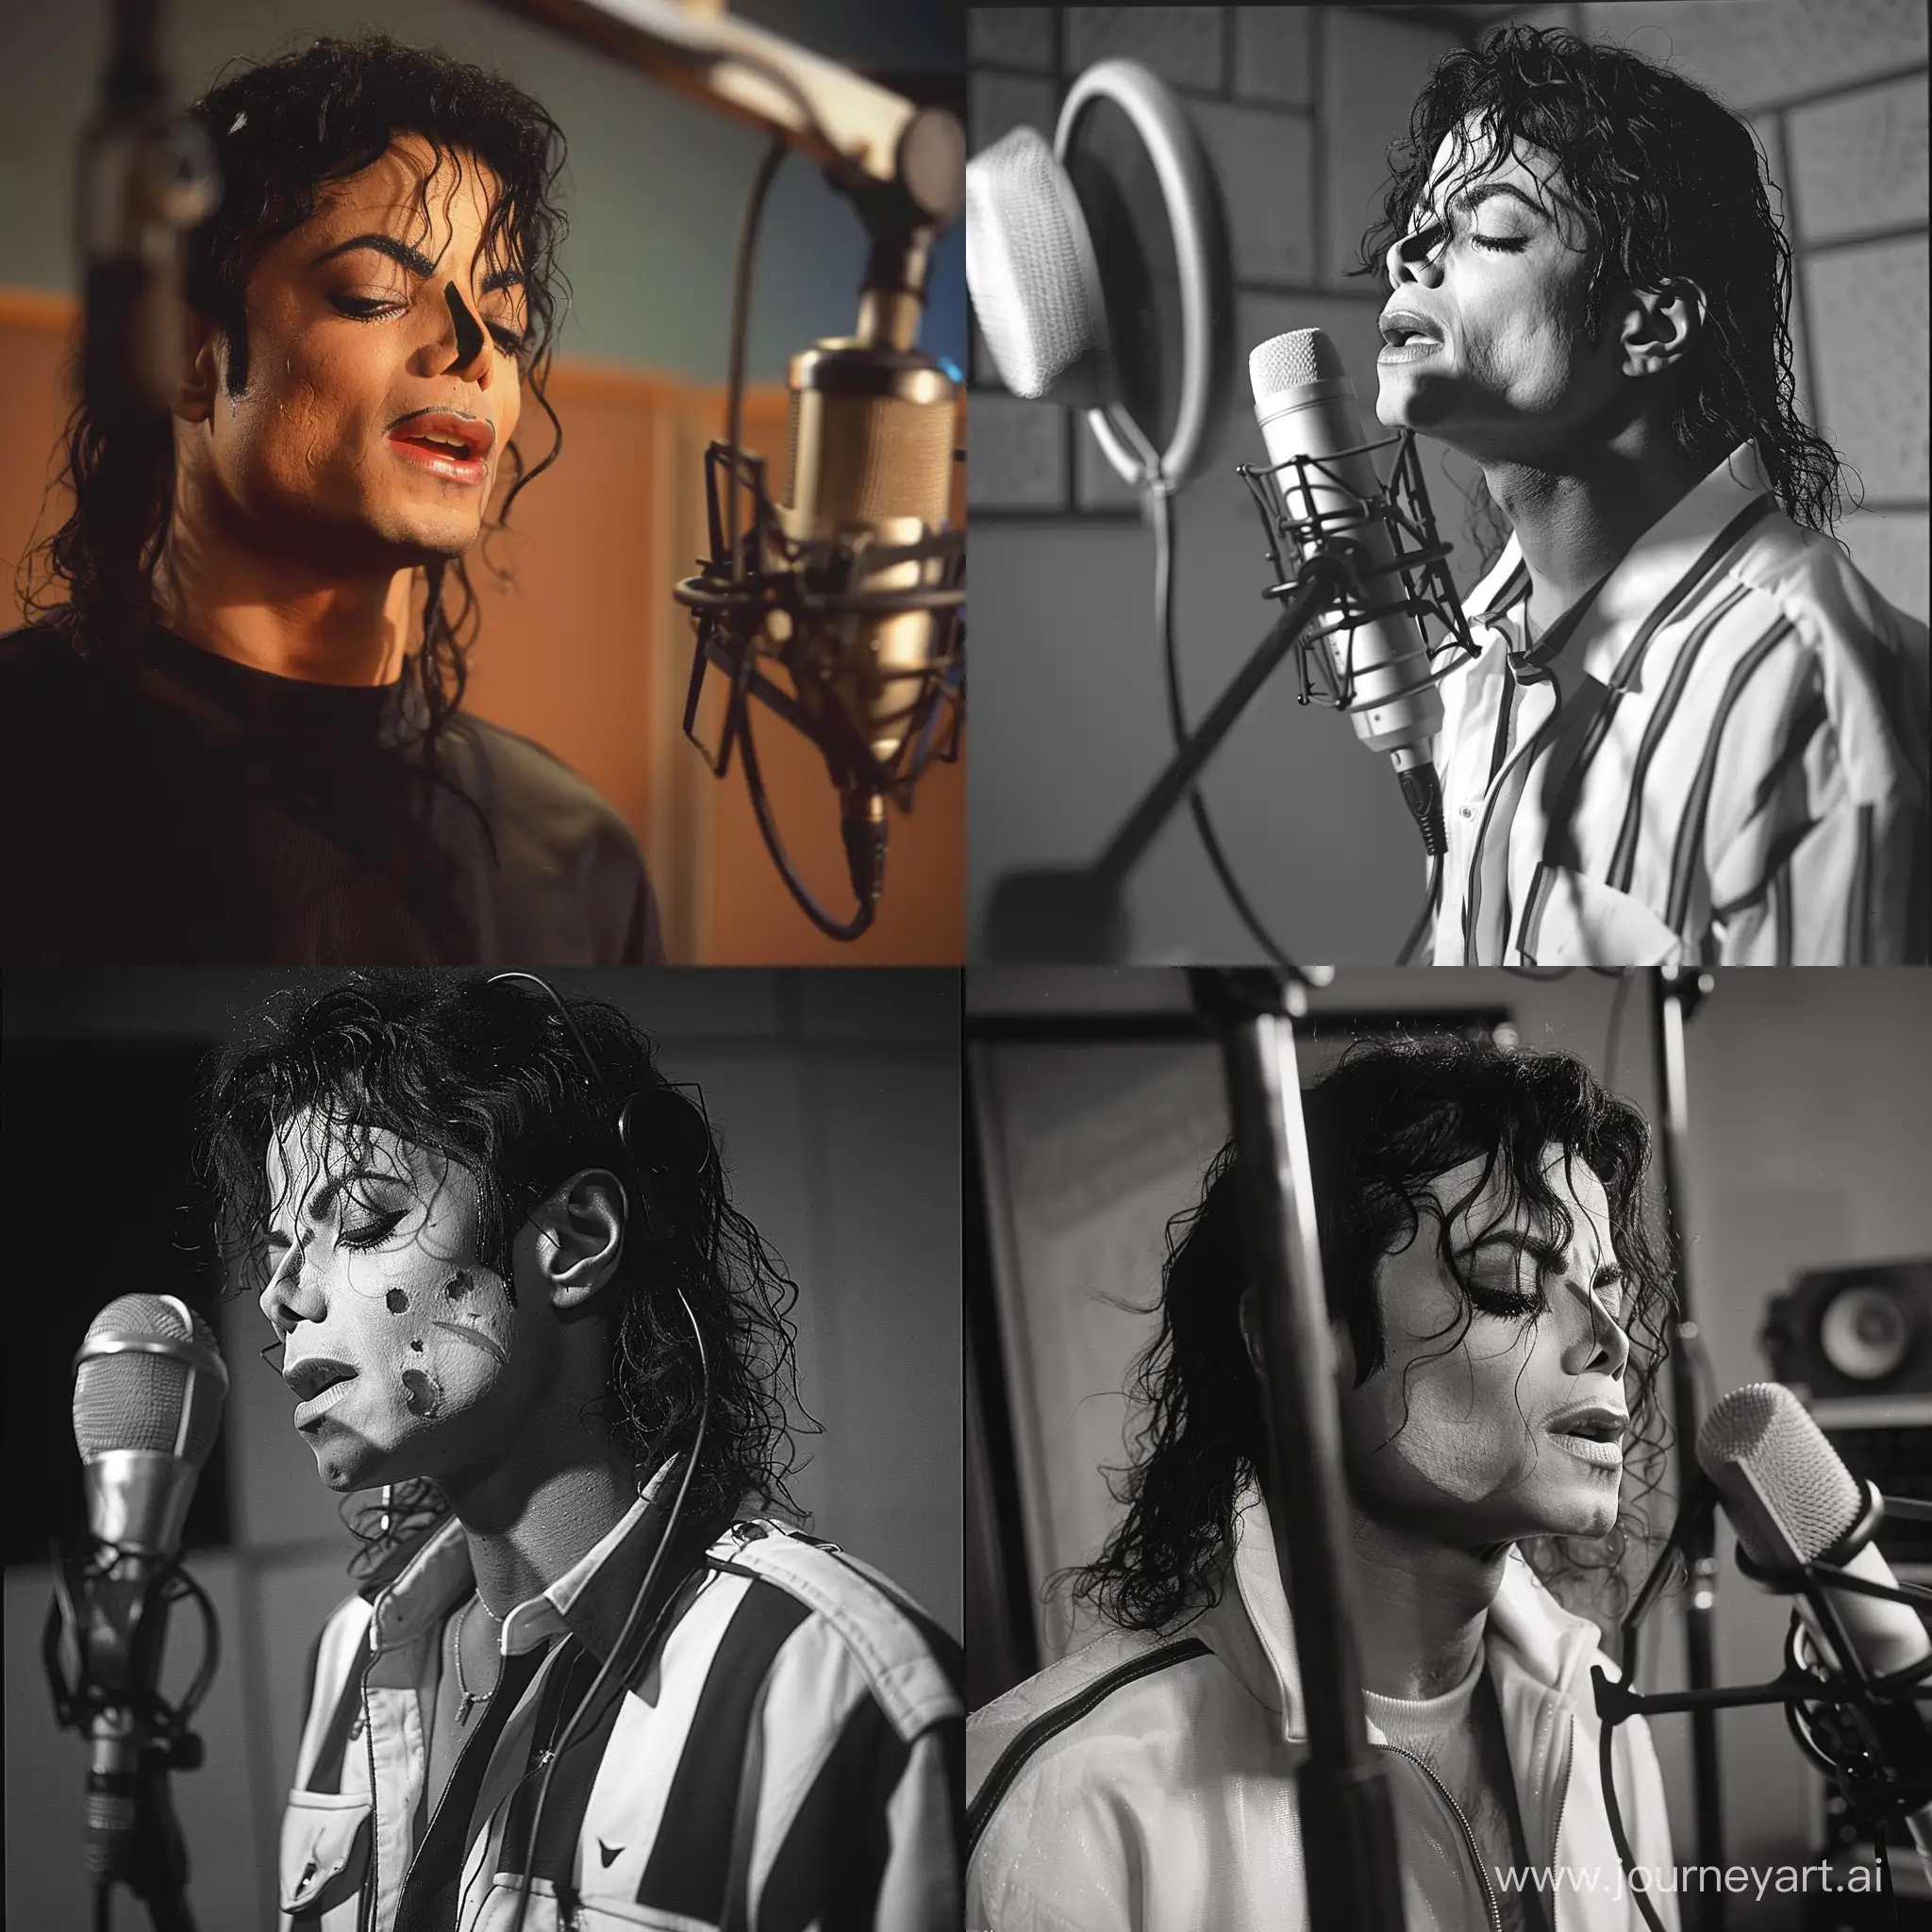 Michael Jackson in a recording session